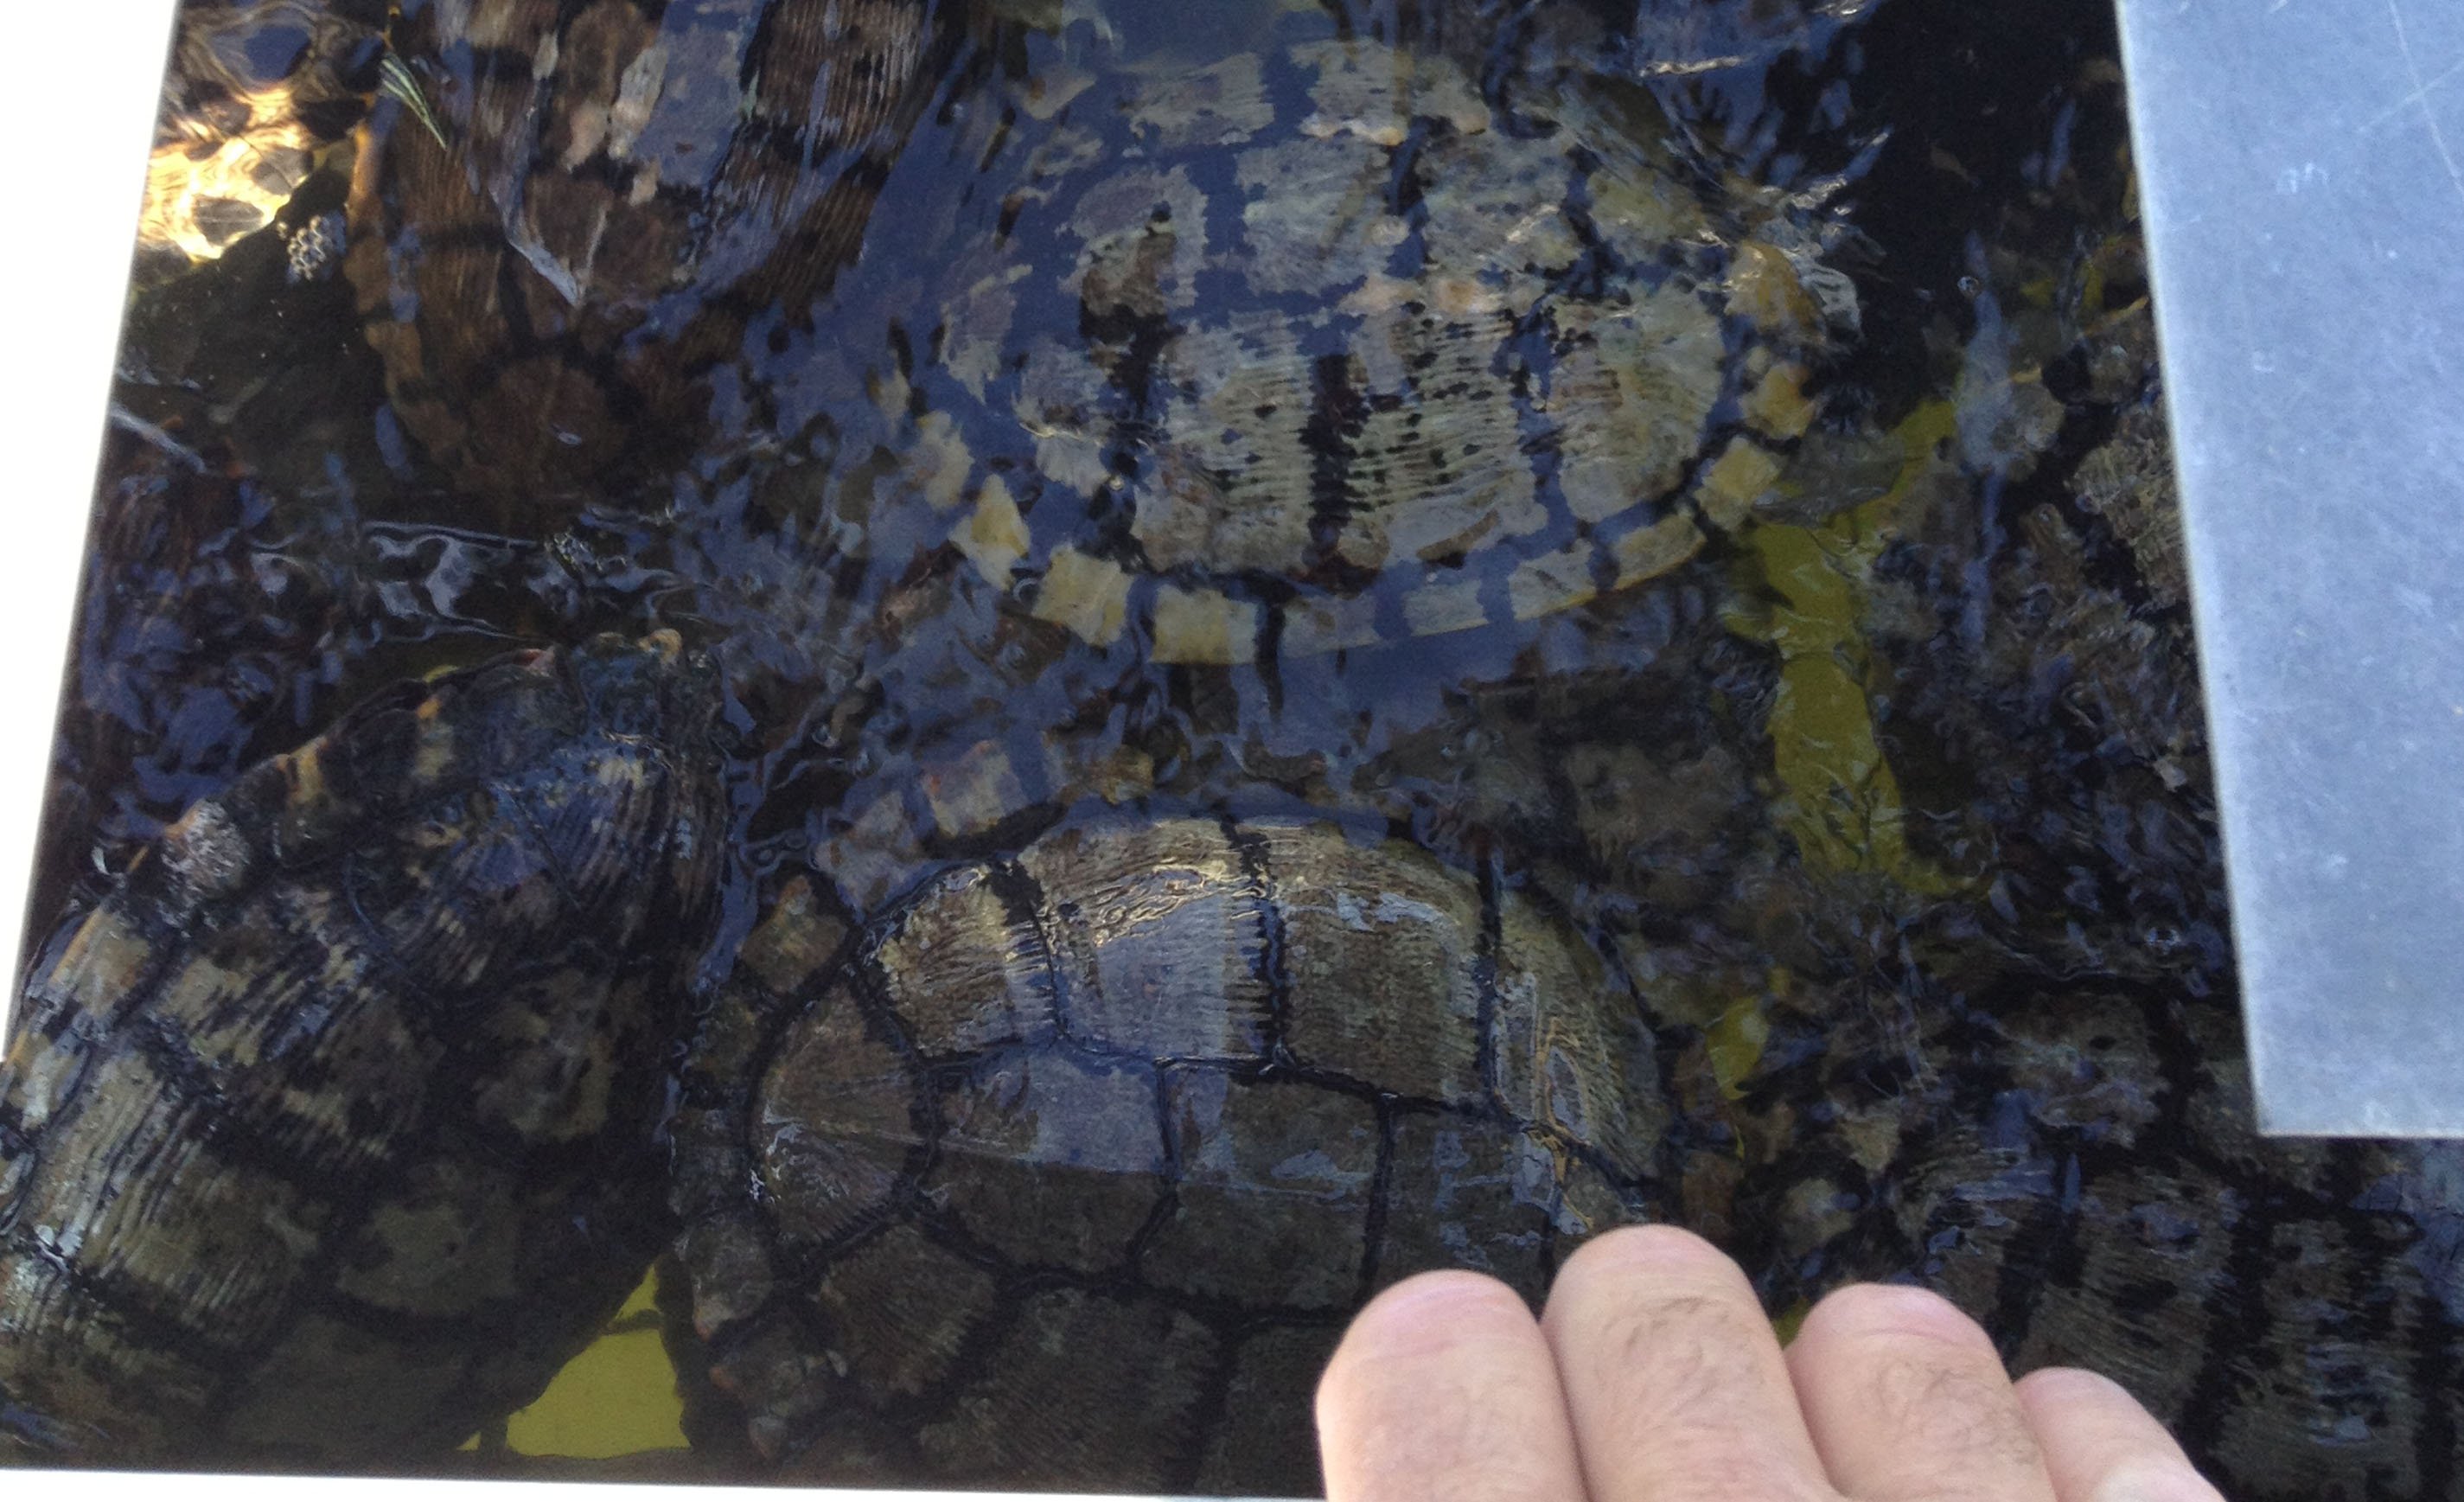 How Turtles Affect Your Pond (& How to Control Them)